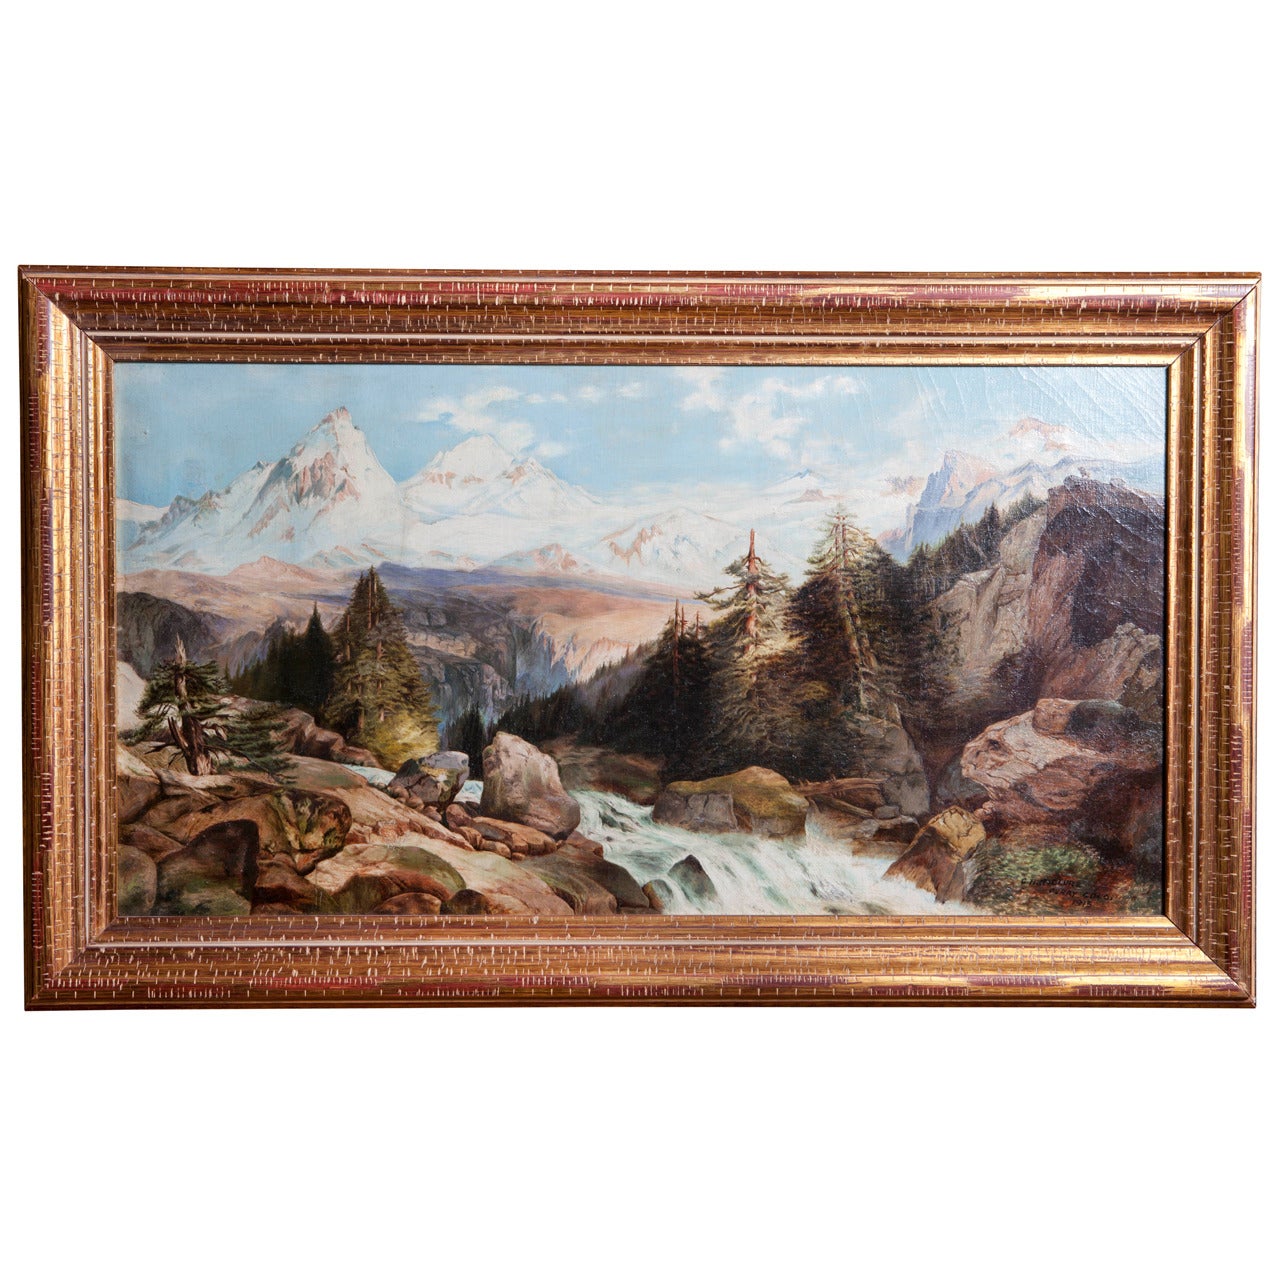 Landscape Painting of Ouray, CO circa 1915